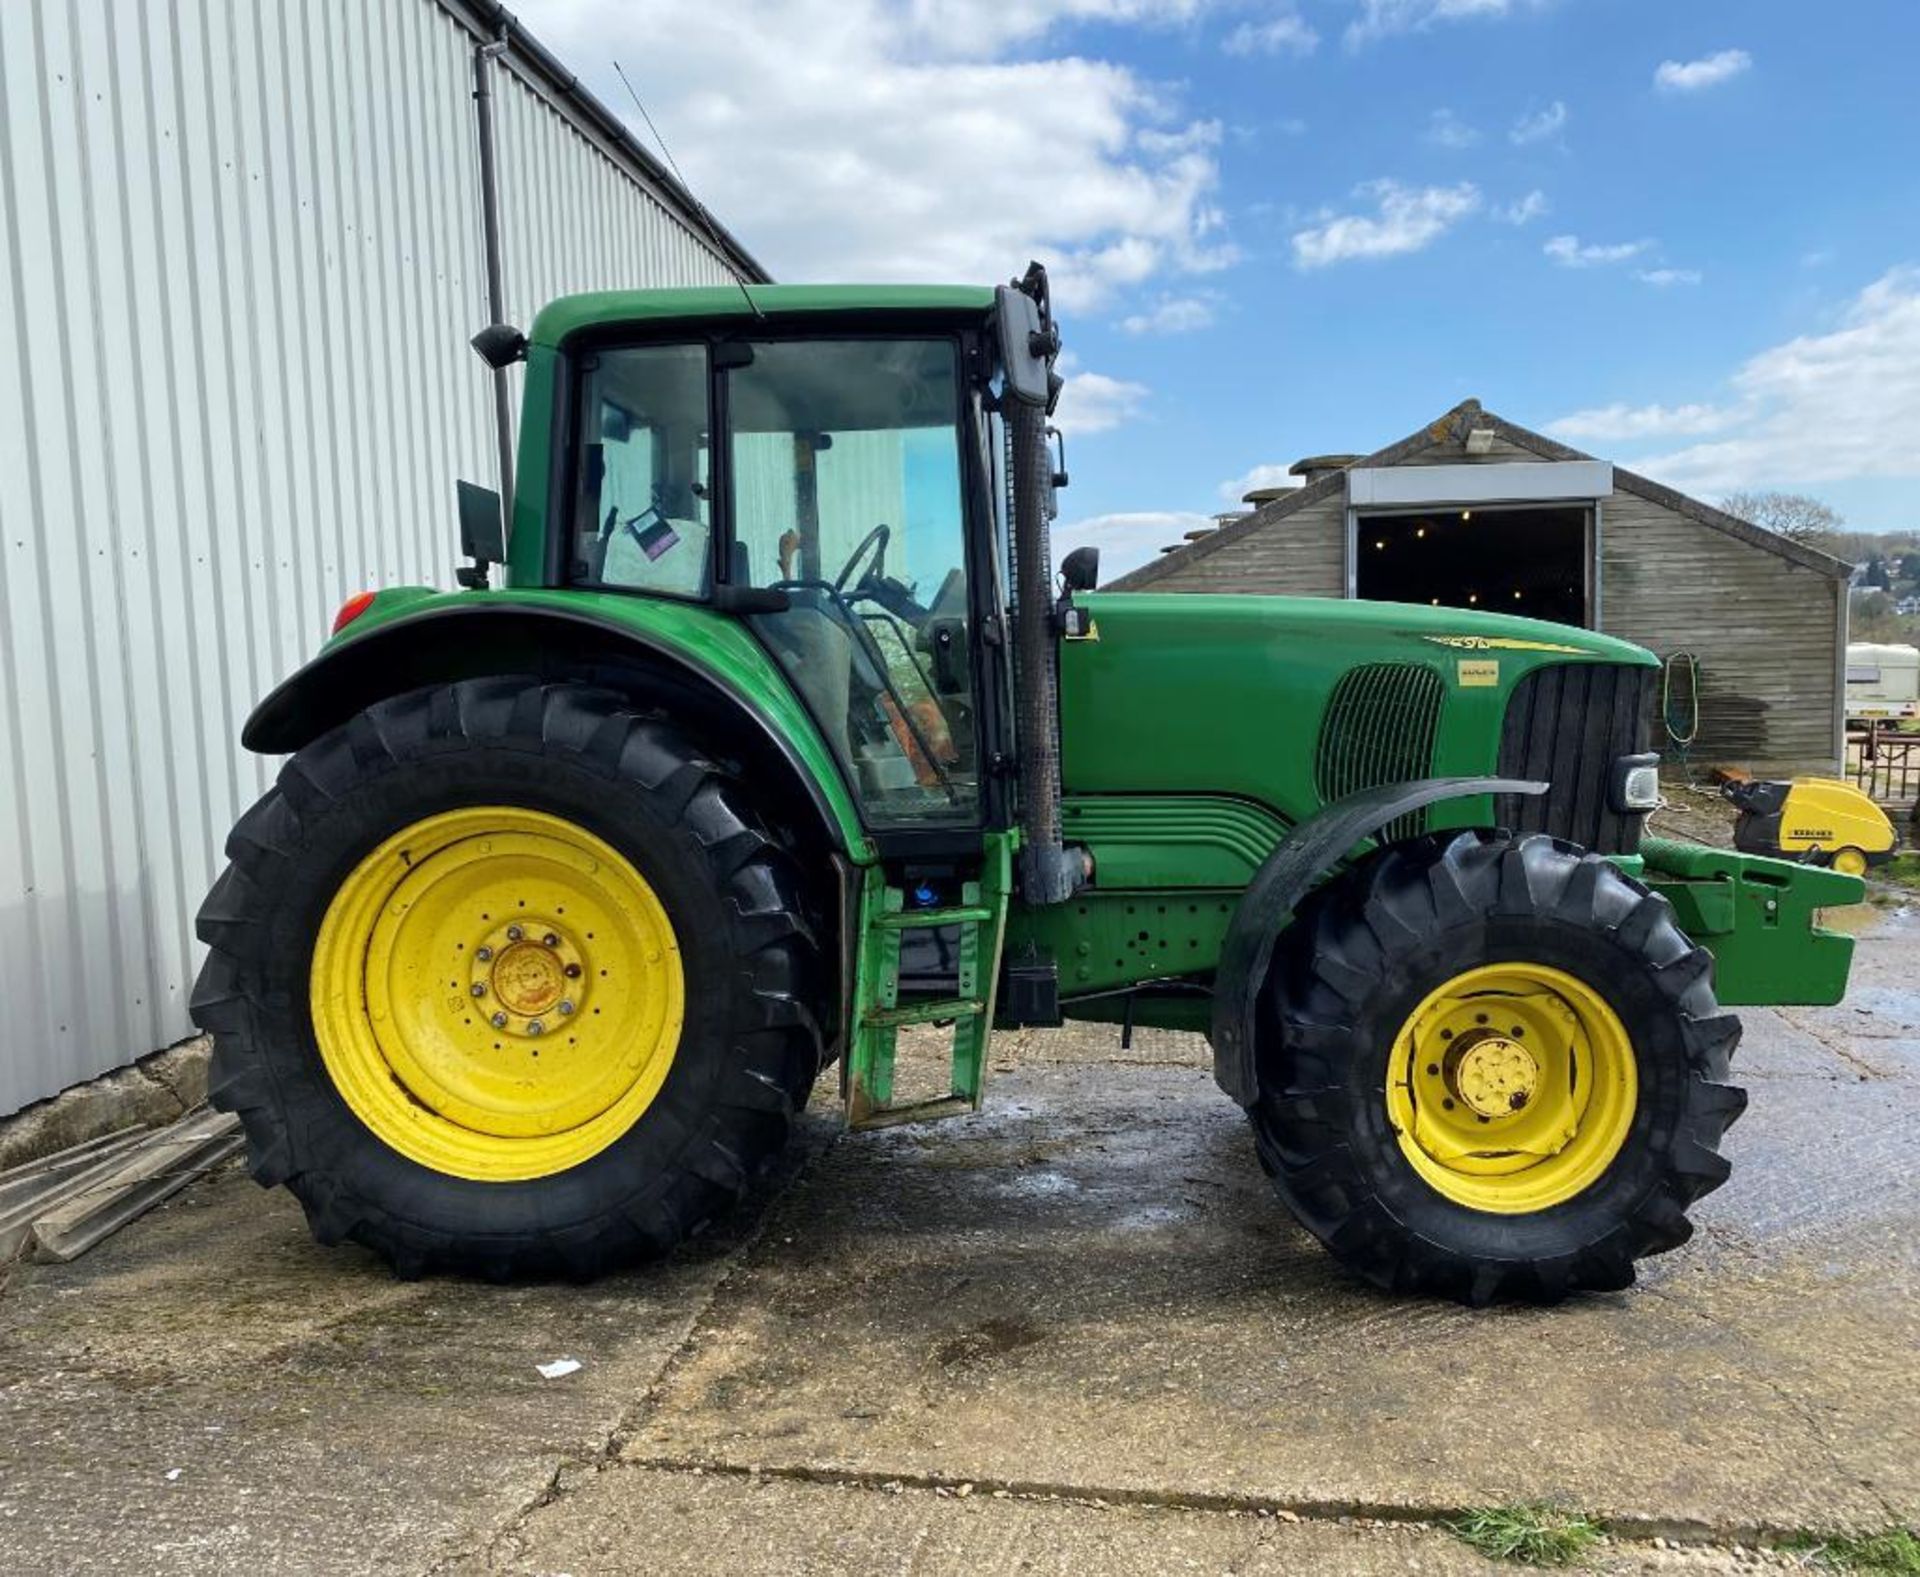 2003 John Deere 6620, 4wd, front wafer weights, 2 spools. Reg: OEO3 ZPB. Hours: 6,900 - Image 4 of 8